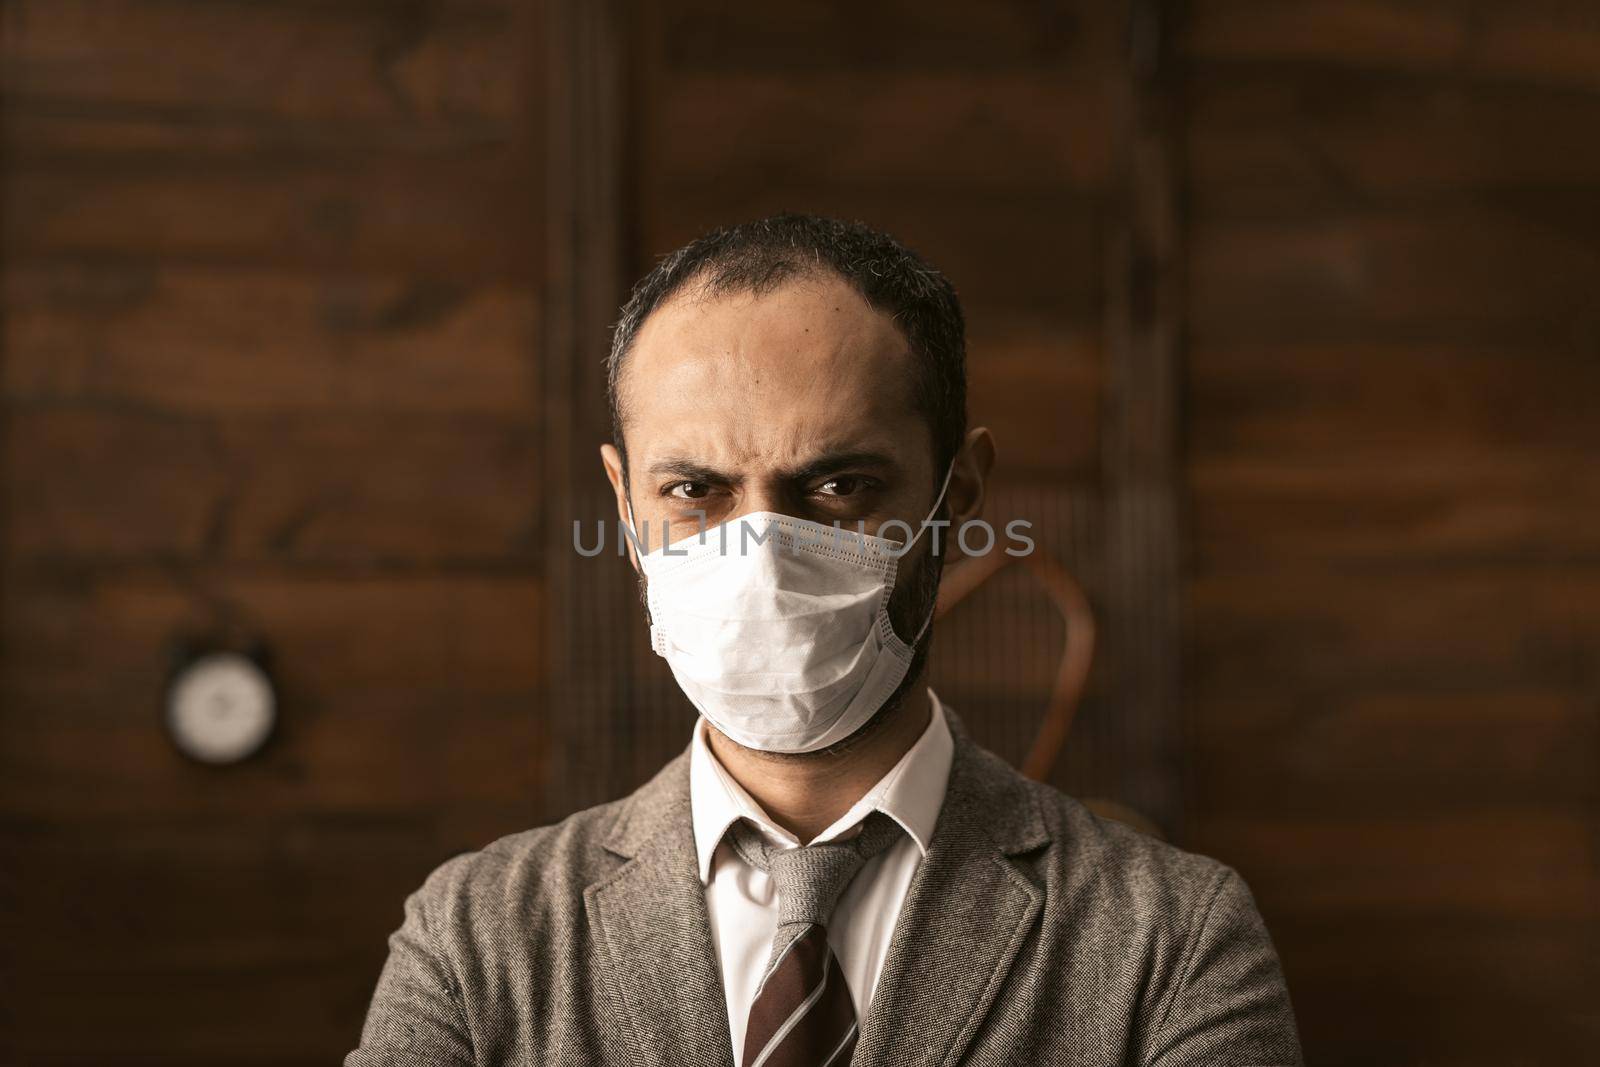 Serious Business Man In Protective Mask Is In Isolation Due To Epidemic Of Coronavirus, Middle Eastern Man In Suit Makes Stern Face Standing In Modern Office On Wooden Wall Backround, Toned Image